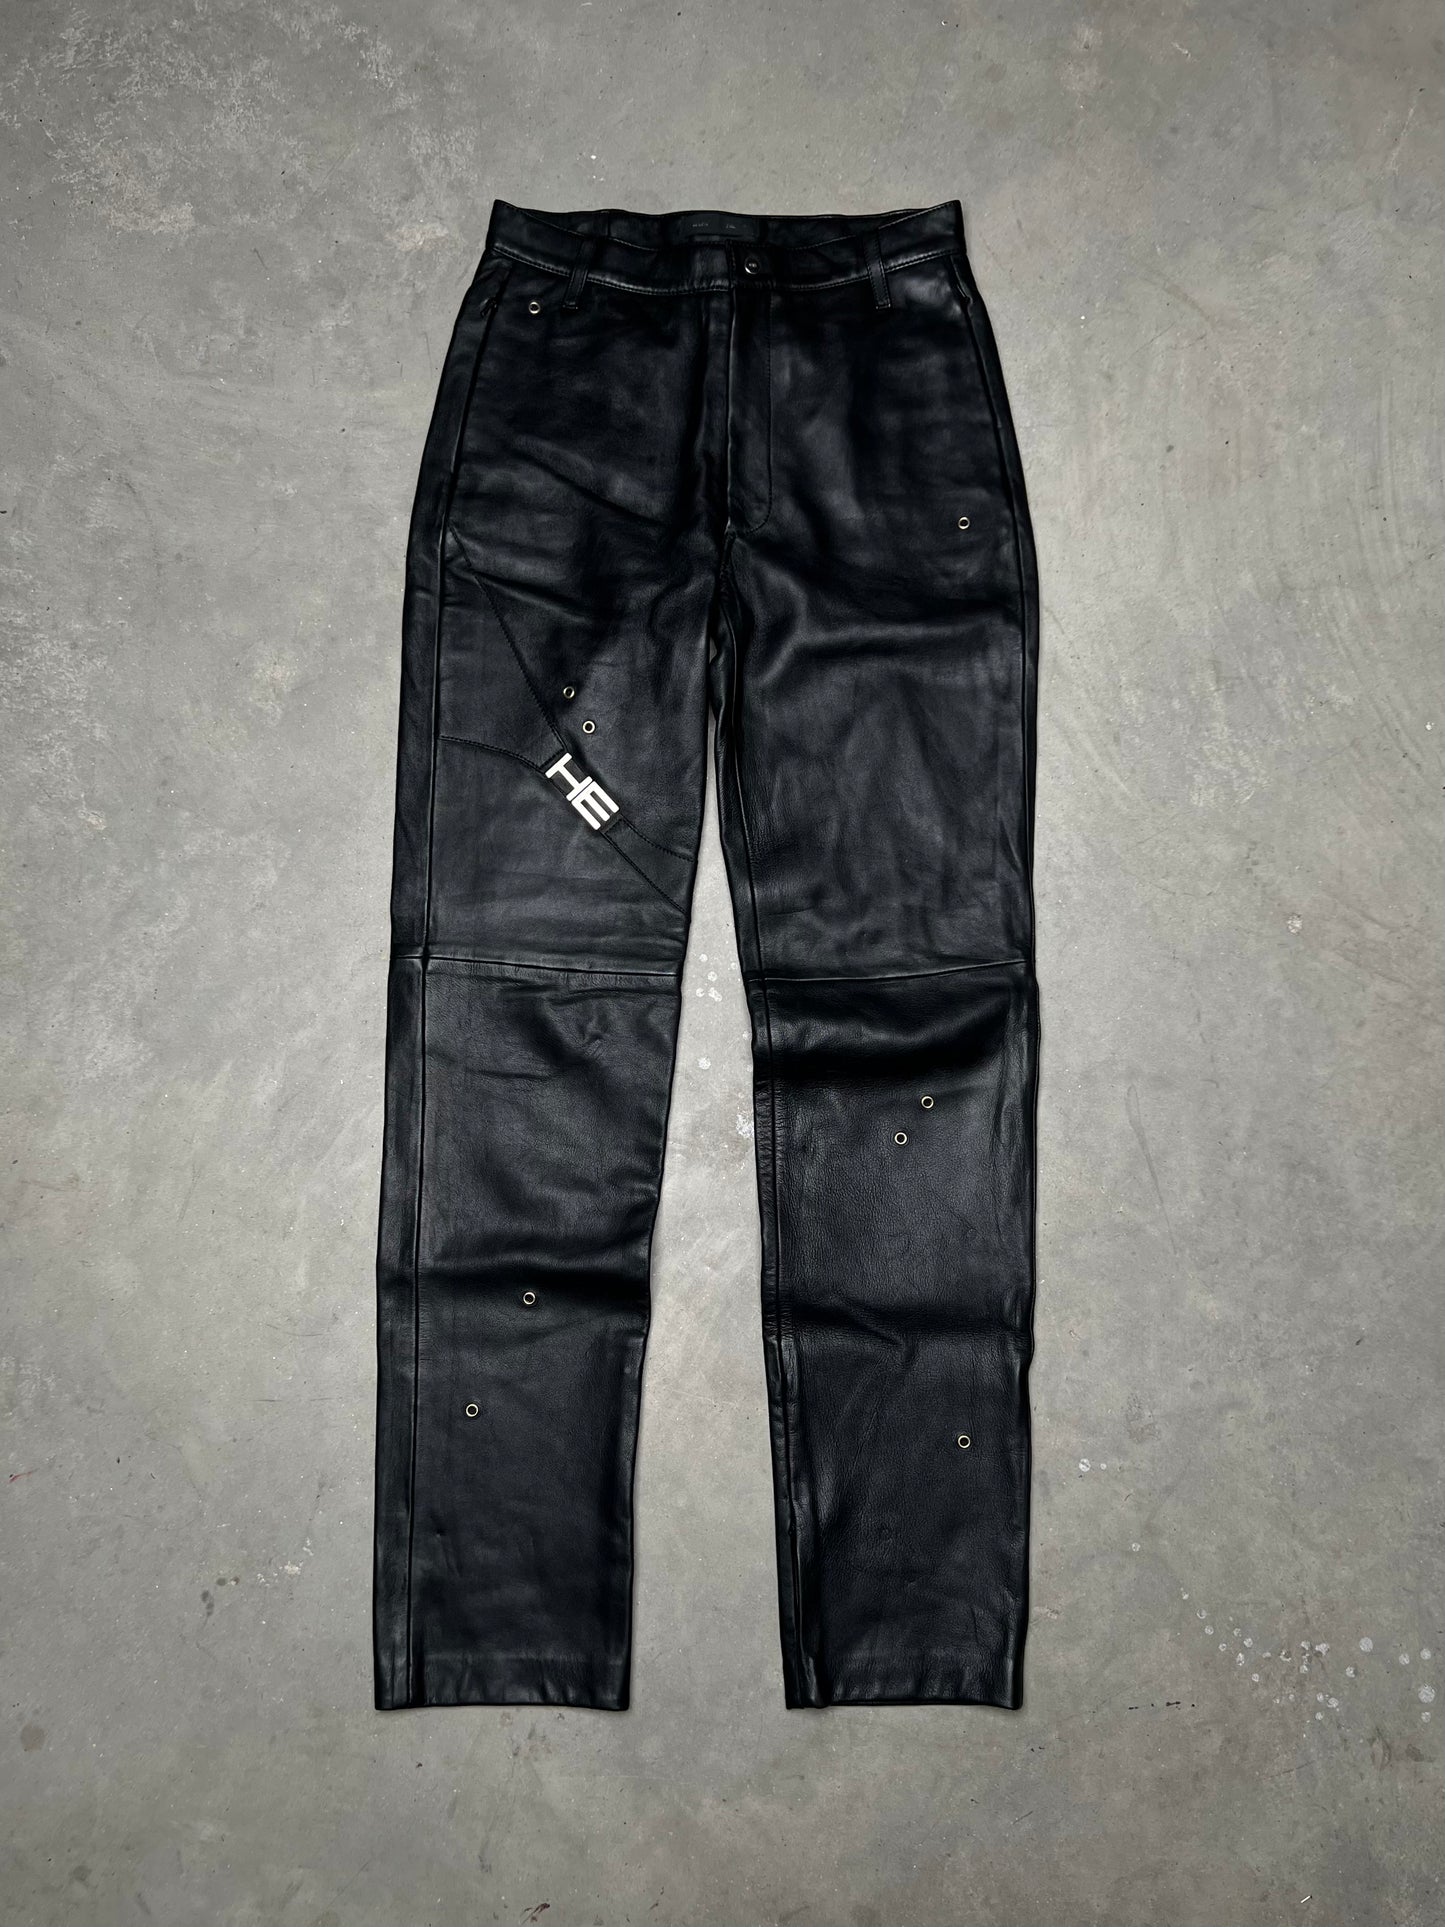 HELIOT EMIL Secluse Leather Trousers